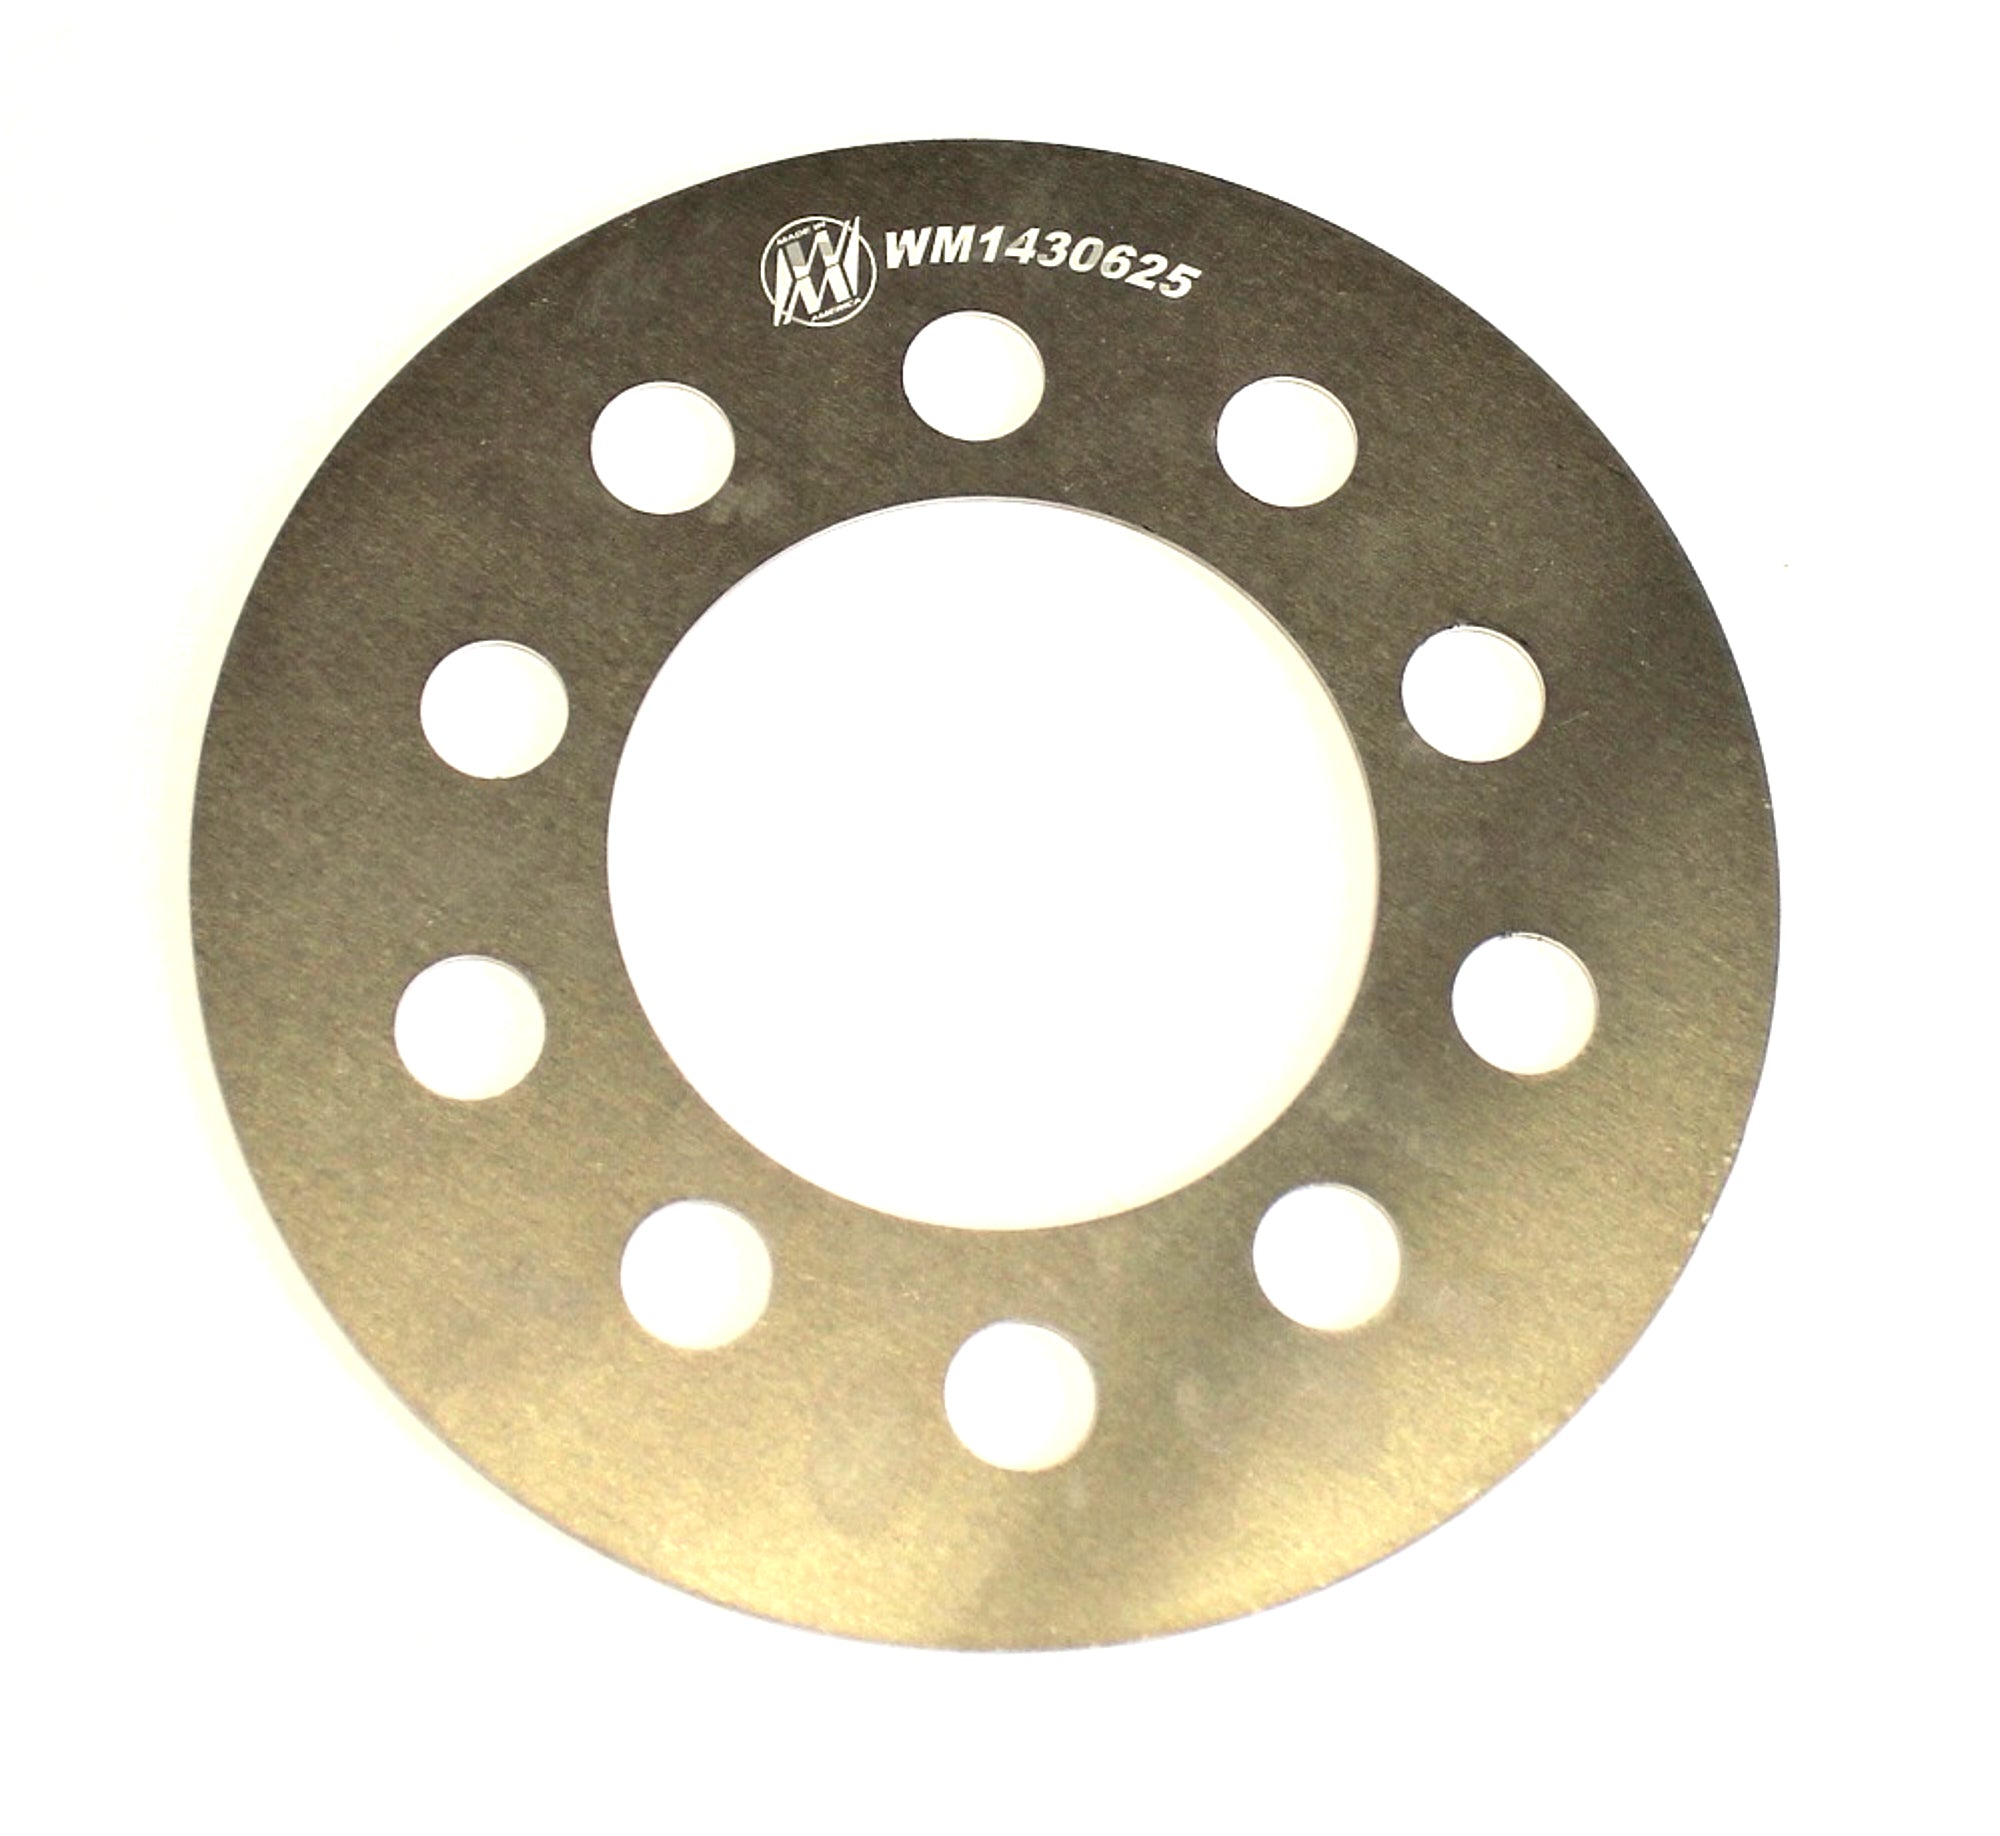 Wehrs Machine SMALL 5 ALUMINUM WHEEL SPACER 1/16 IN THICK Tire and Wheel Accessories Wheel Spacers main image